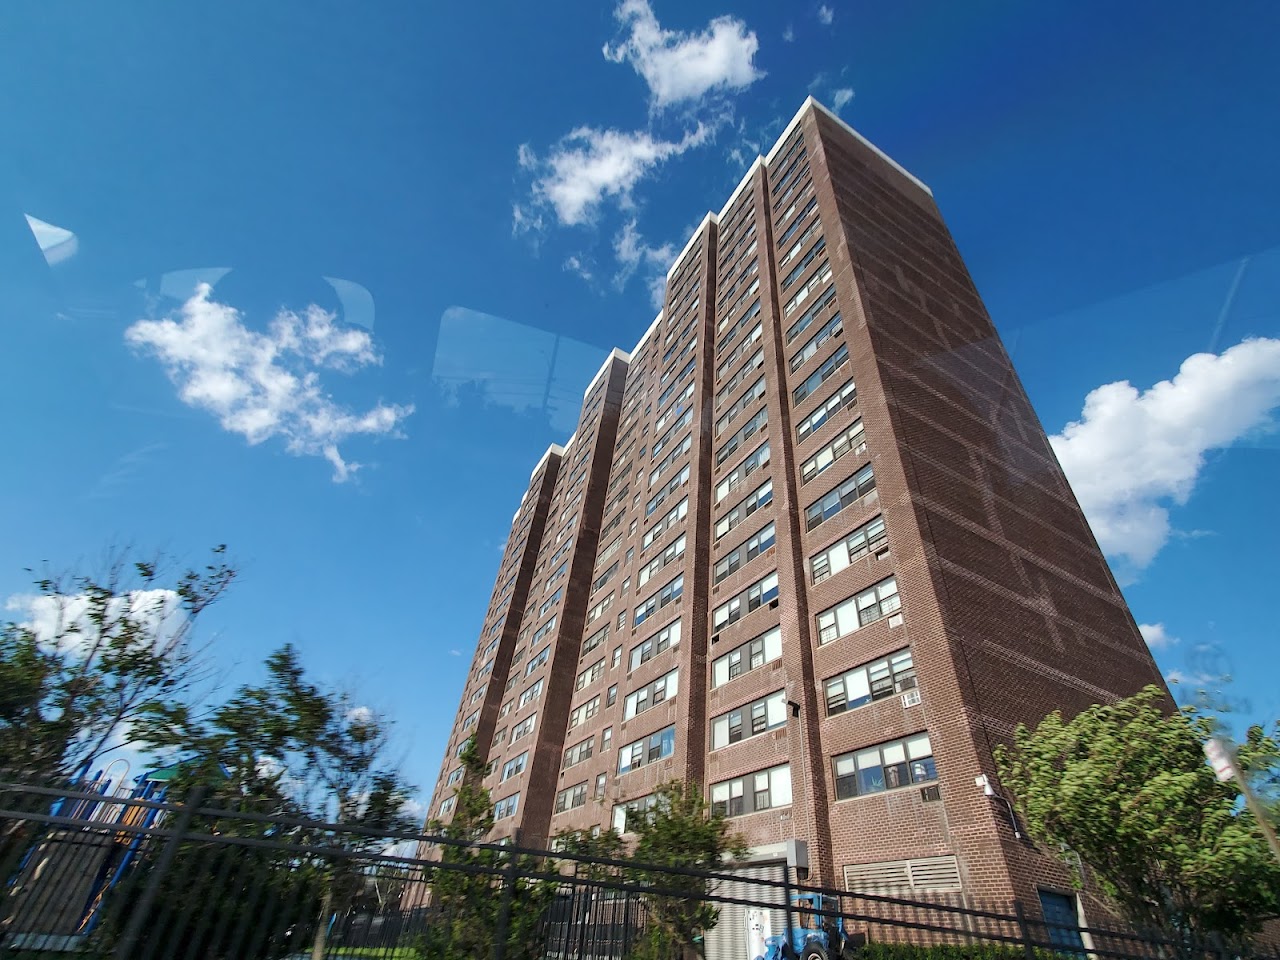 Photo of SEAVIEW TOWERS. Affordable housing located at 331 BEACH 31ST. STREET FAR ROCKAWAY, NY 11691